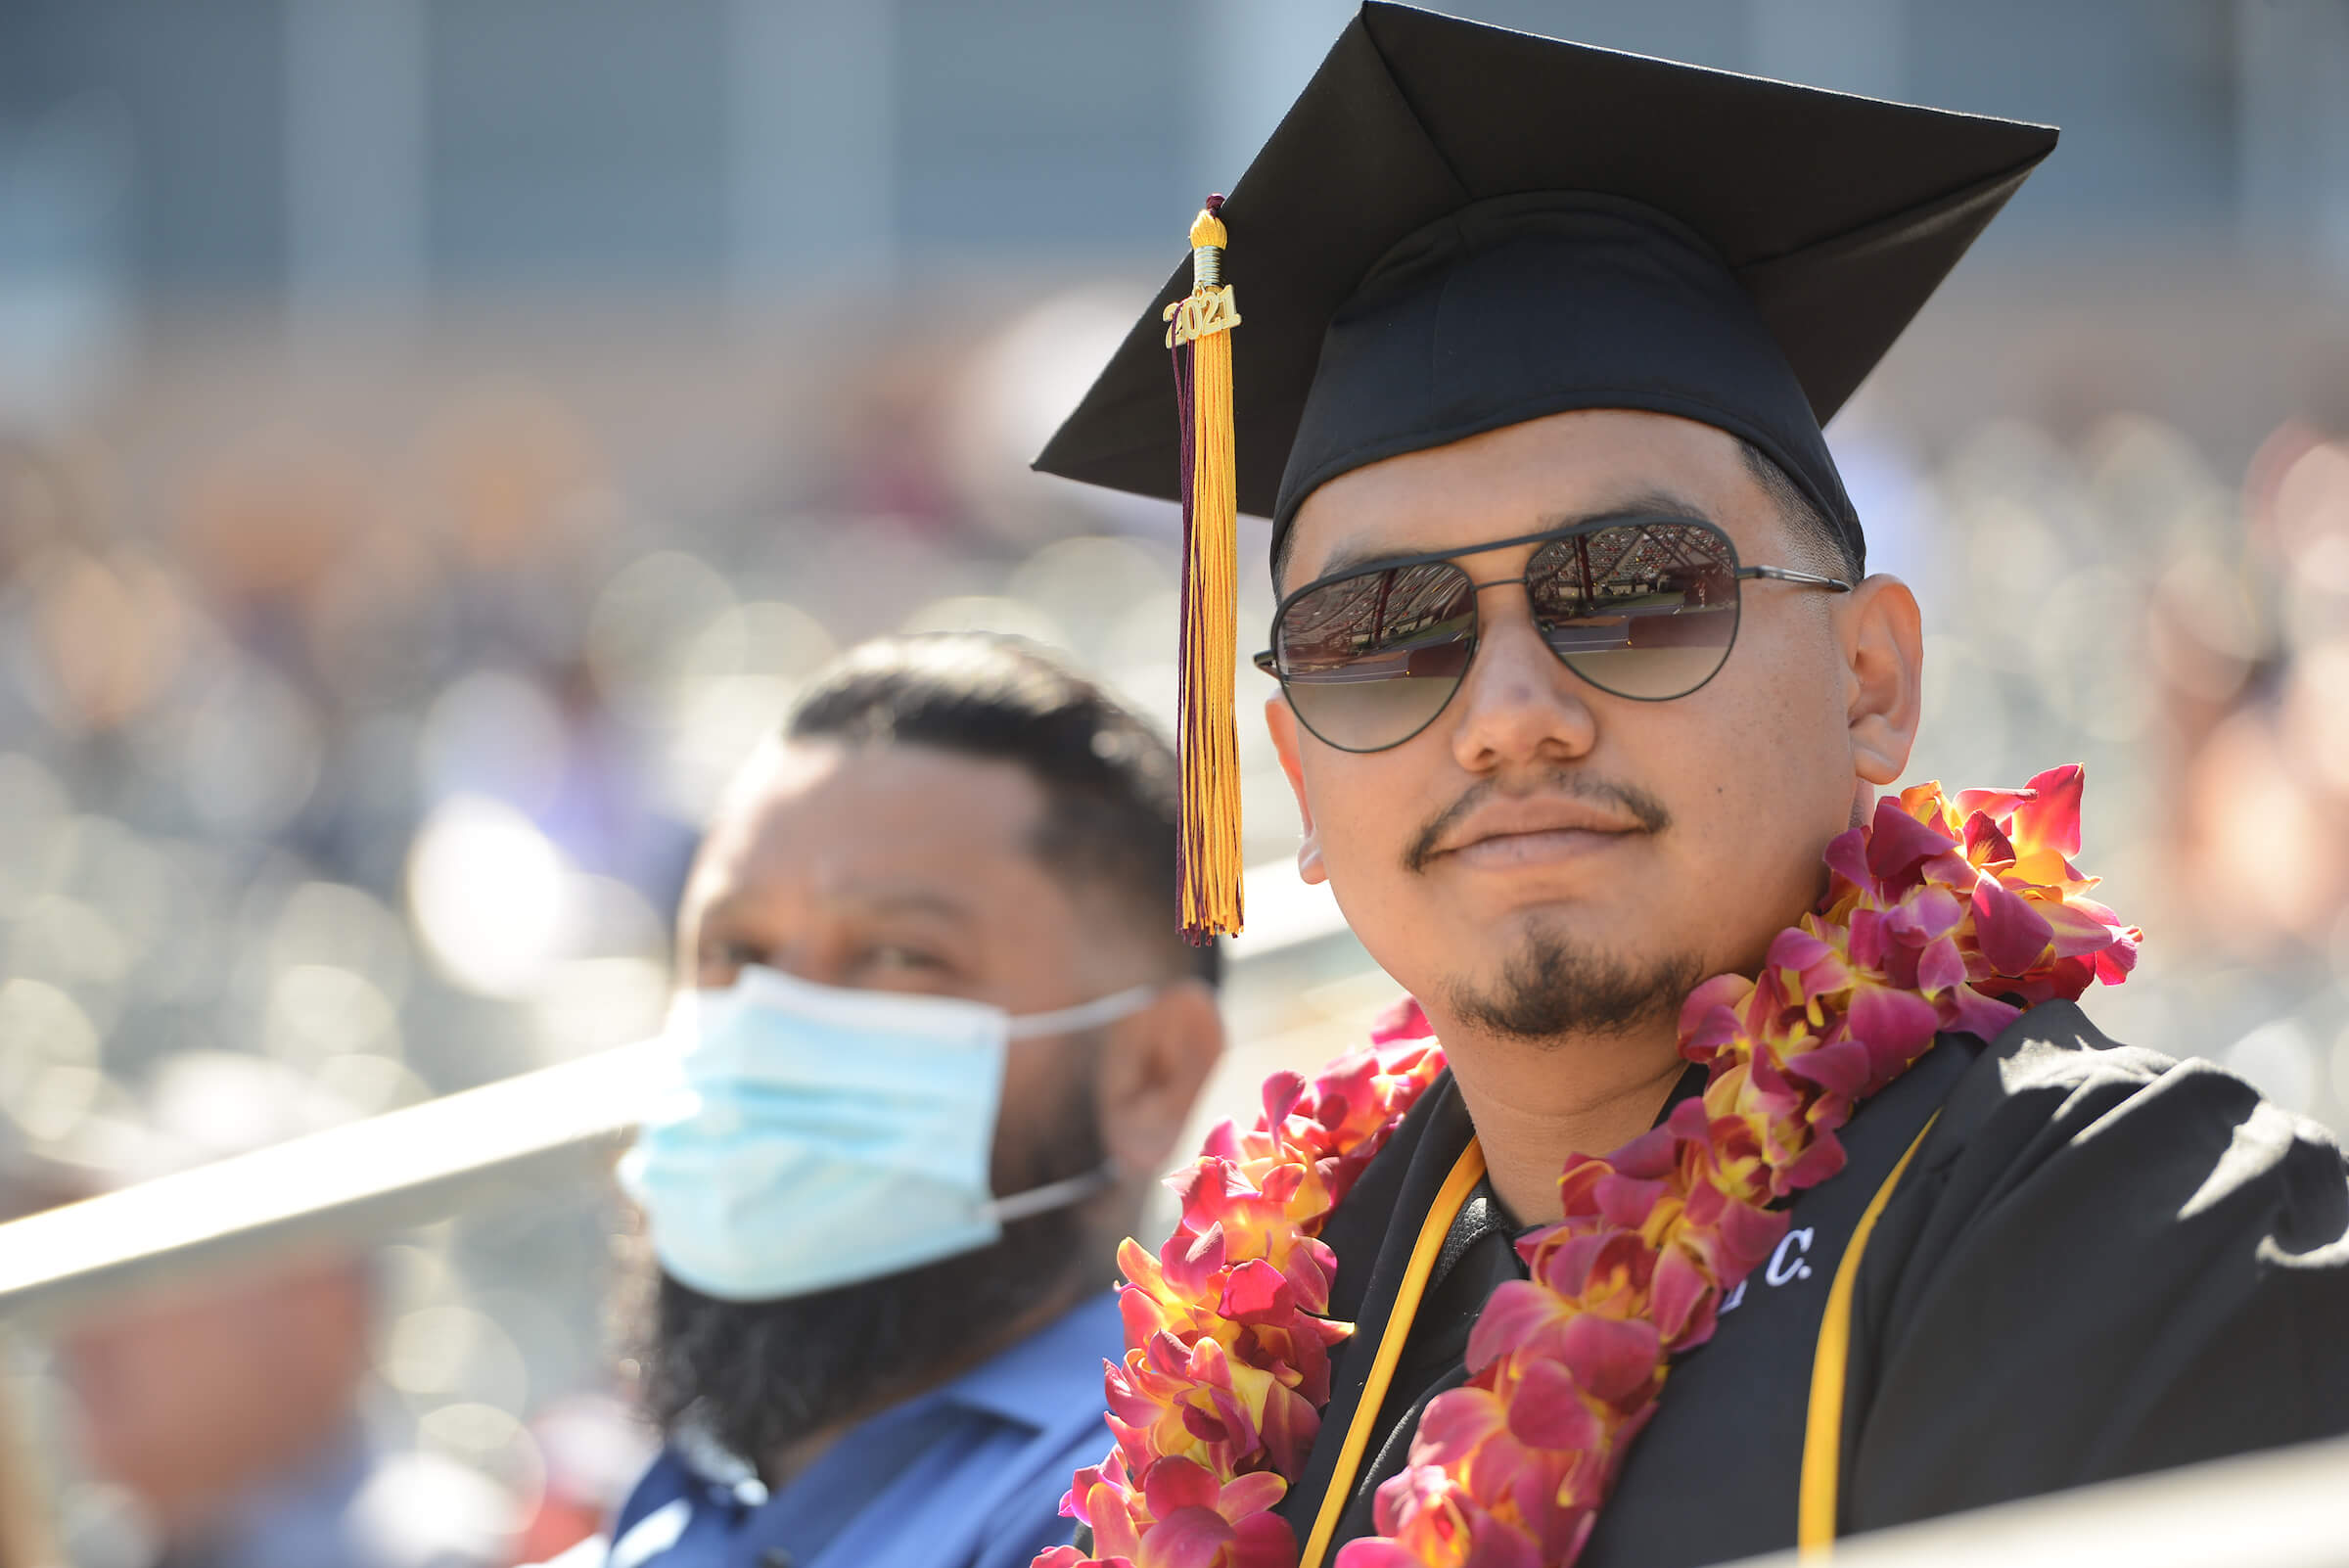 man with grad cap and sunglasses